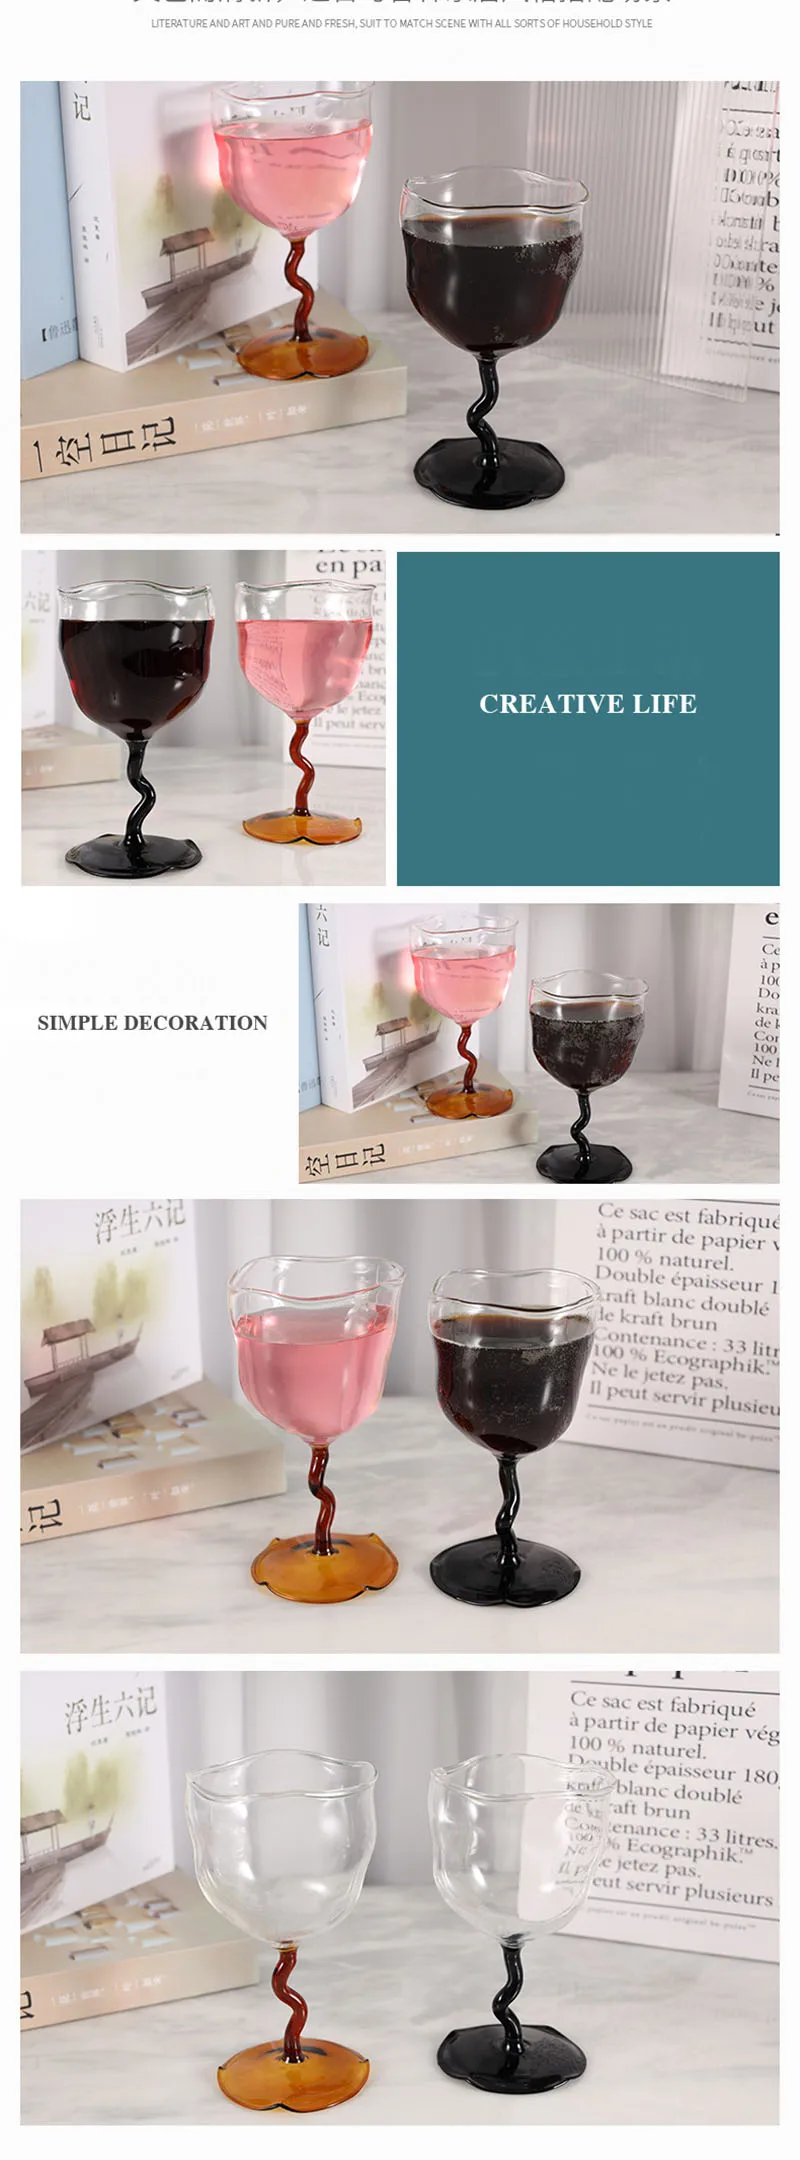 1pc Glass Cup, Creative Irregular Goblet For Kitchen